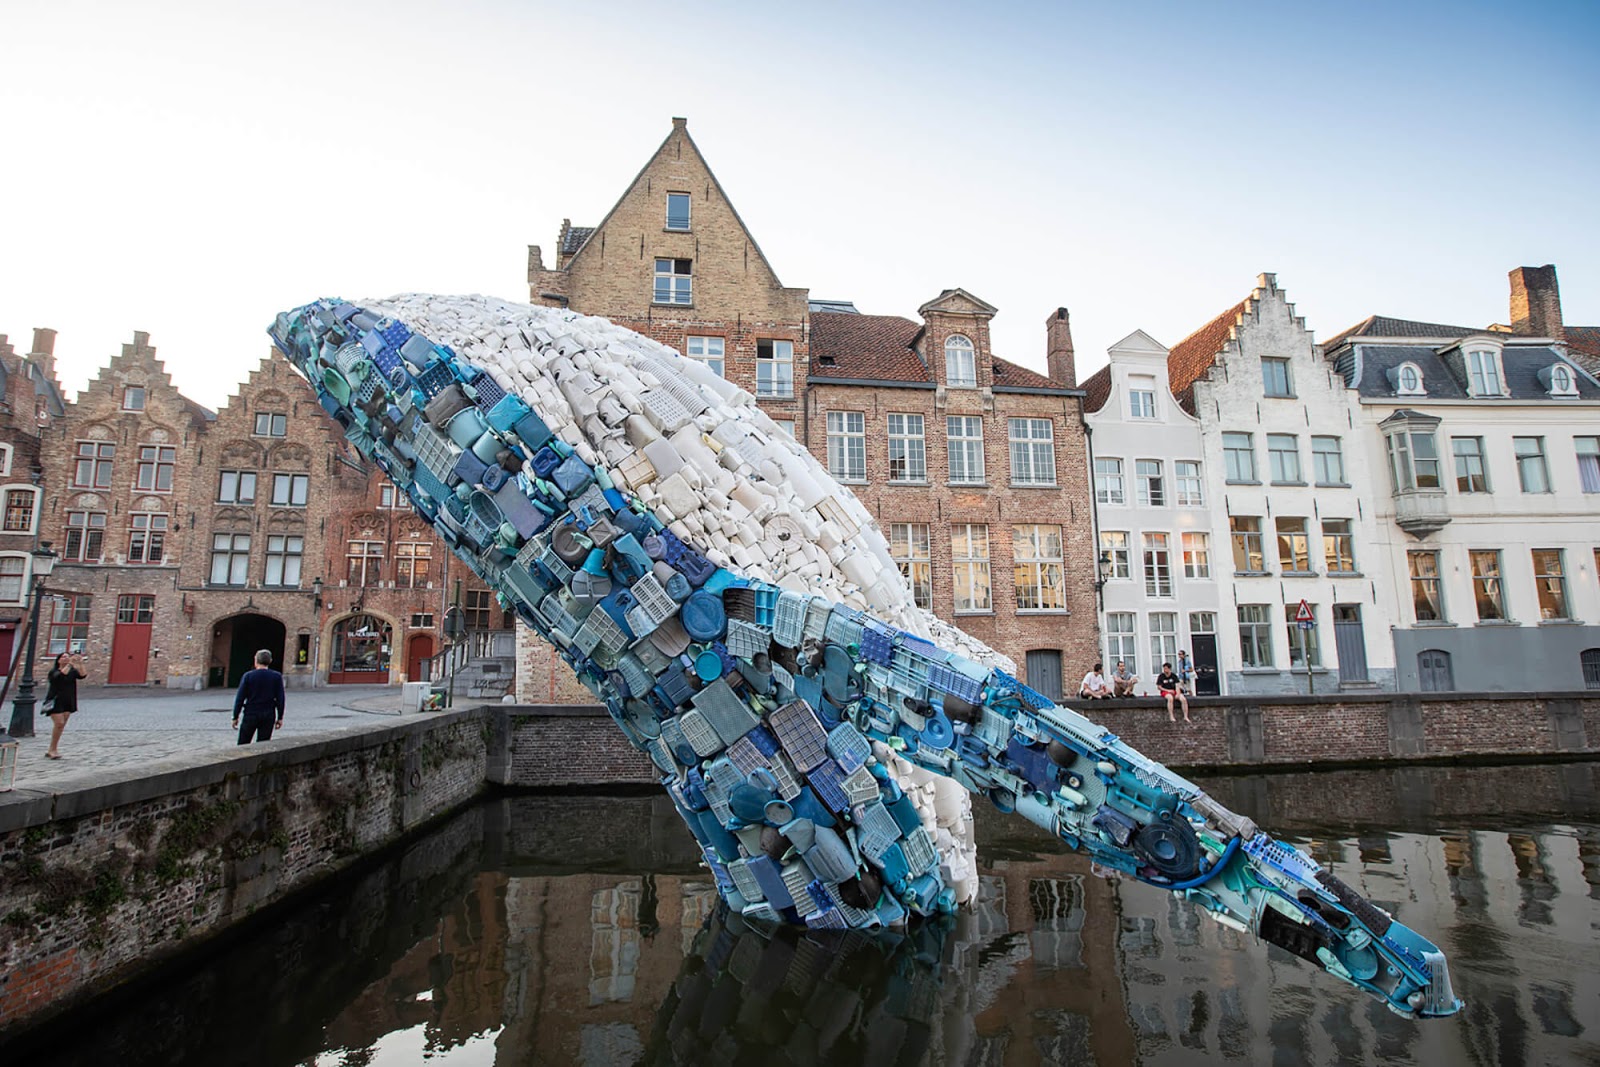 38-Foot-Tall Whale Was Made Of 10,000 Pounds of Plastic Waste Found In The Ocean As A Way To Raise Awareness